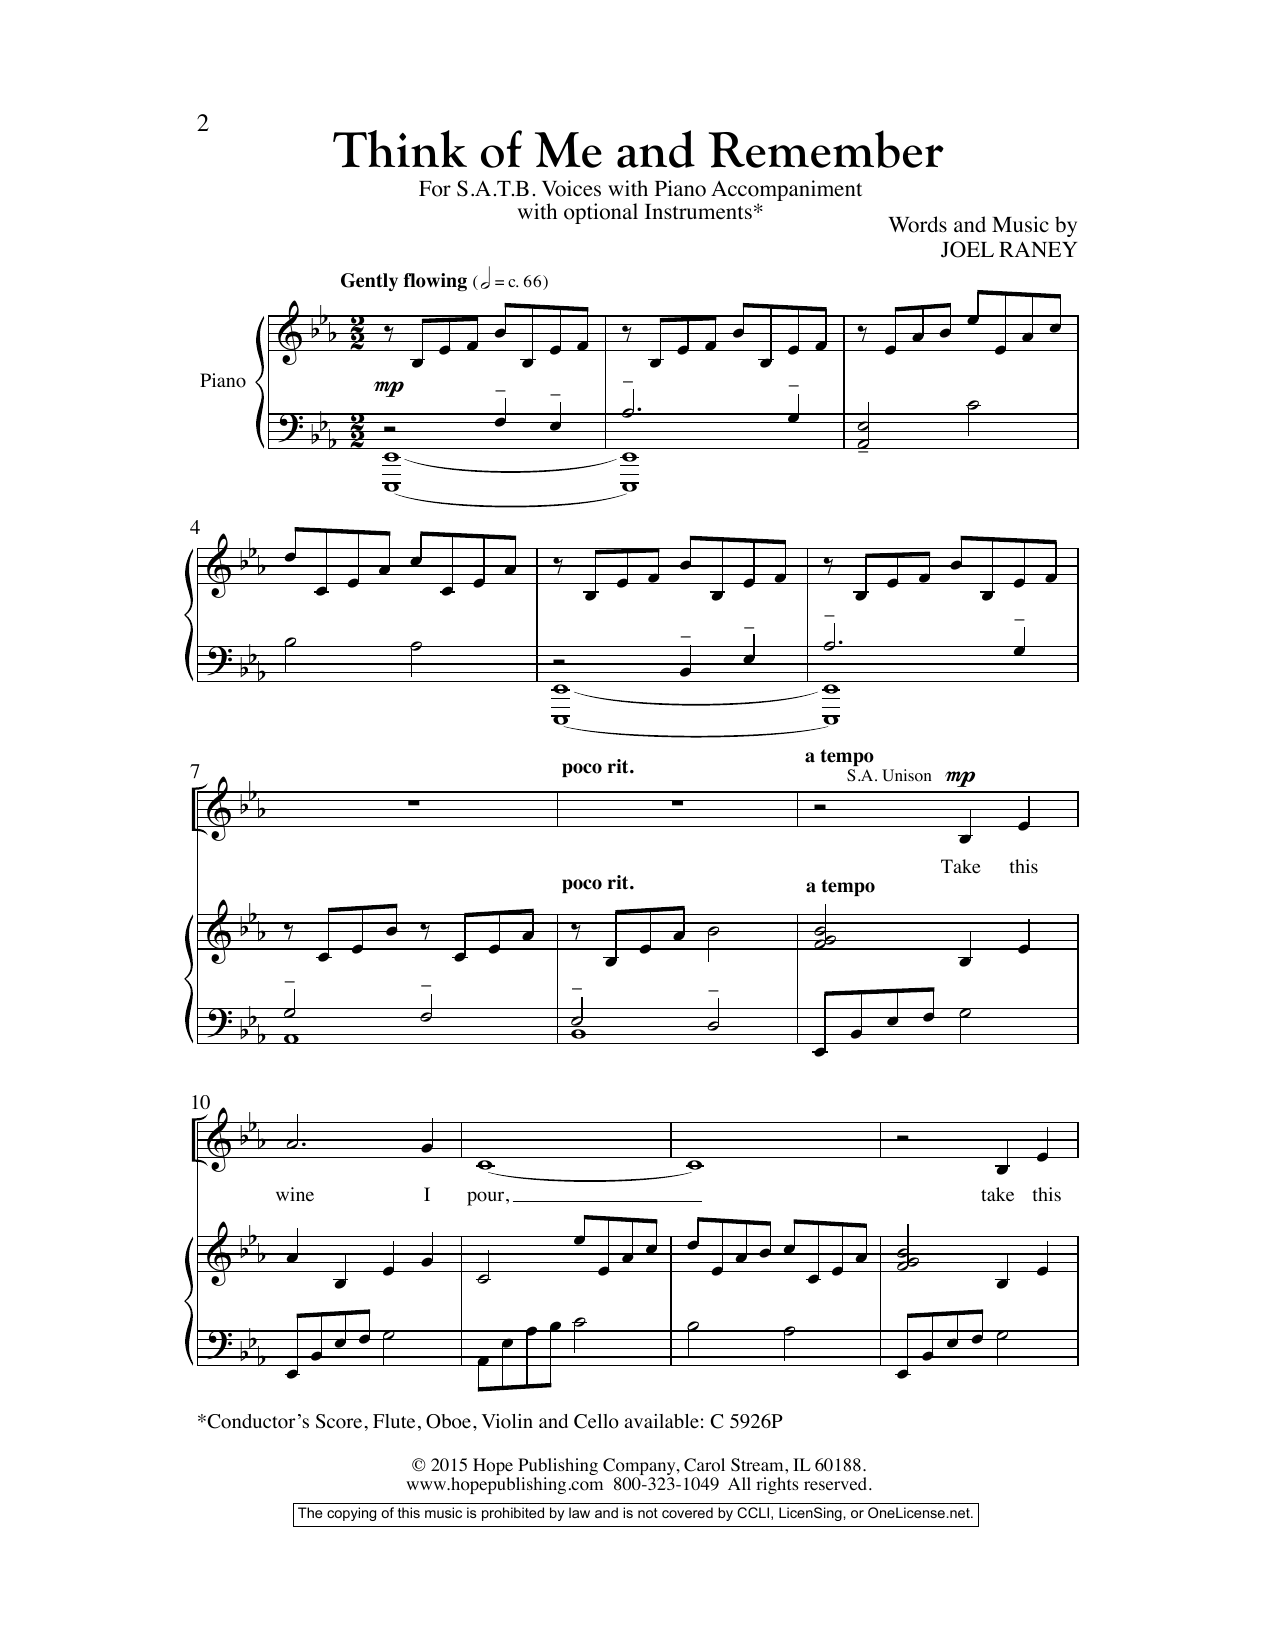 Download Joel Raney Think Of Me And Remember Sheet Music